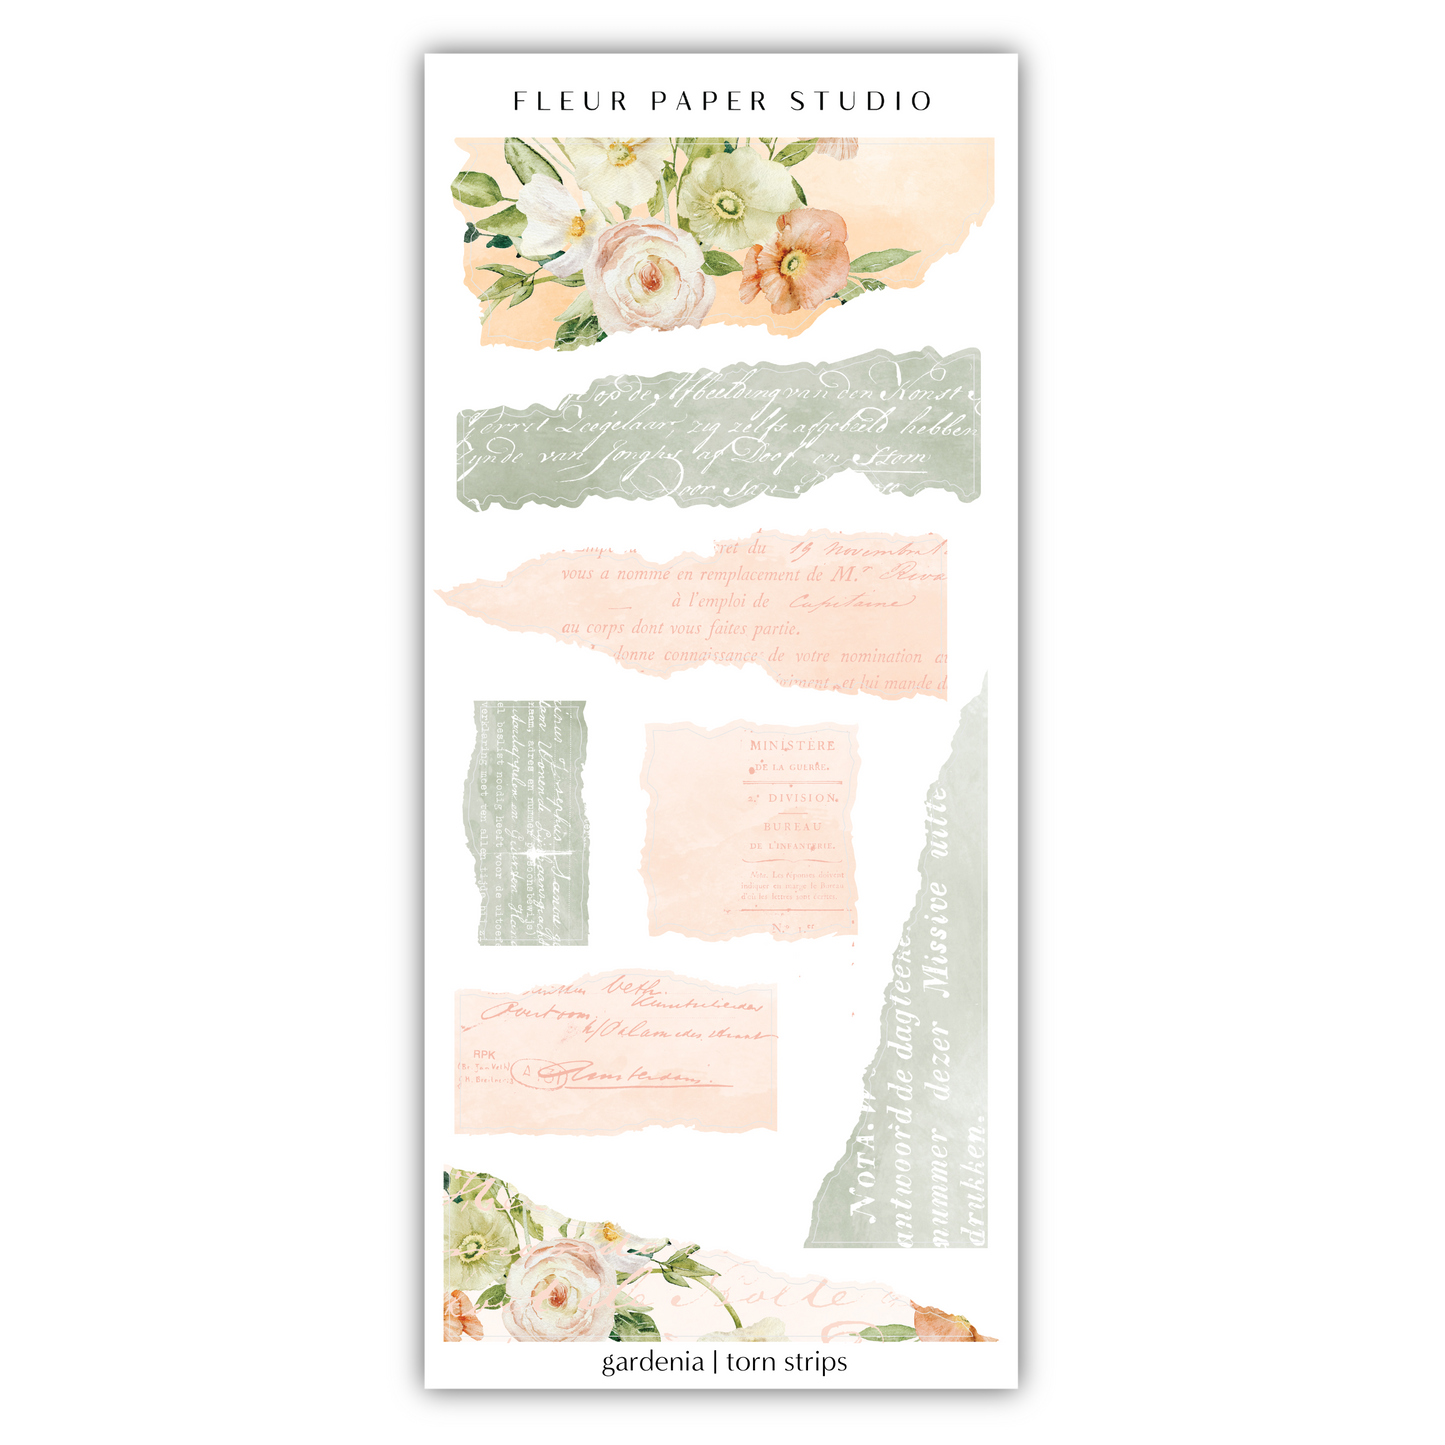 a bookmark with flowers and writing on it